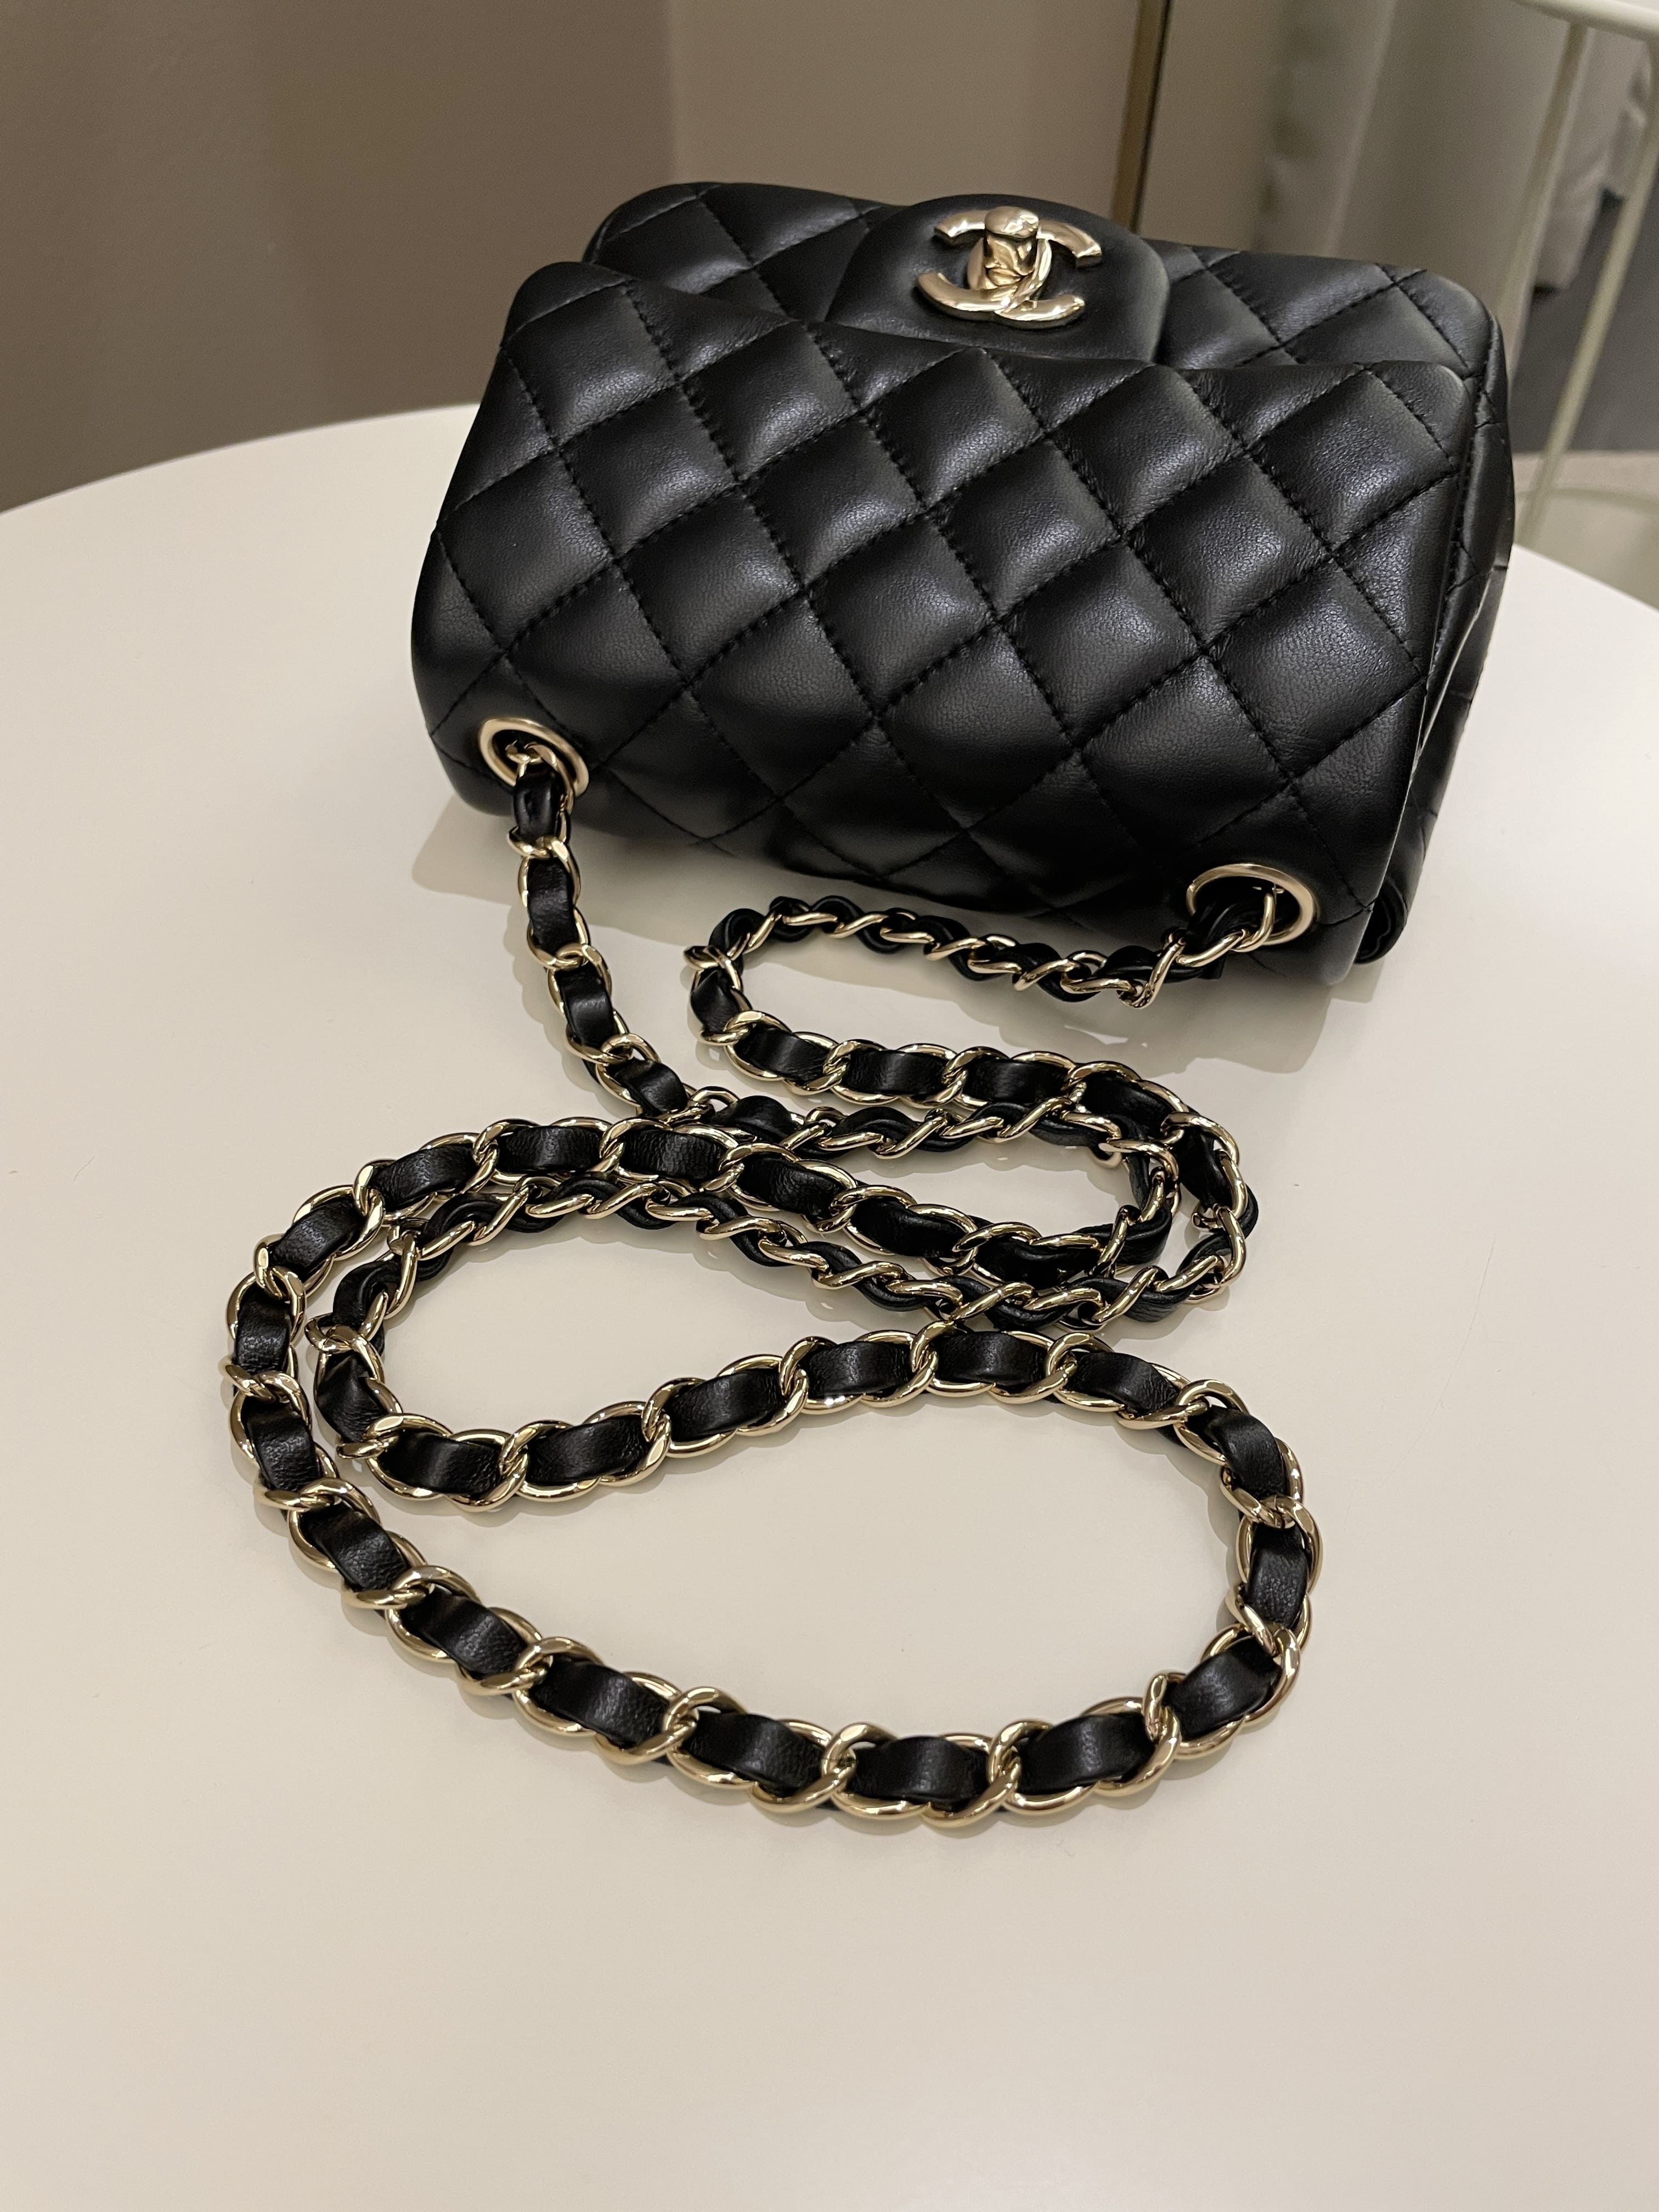 Chanel private collection & Luxury Accessories Online, Sale n°IT4151, Lot  n°202